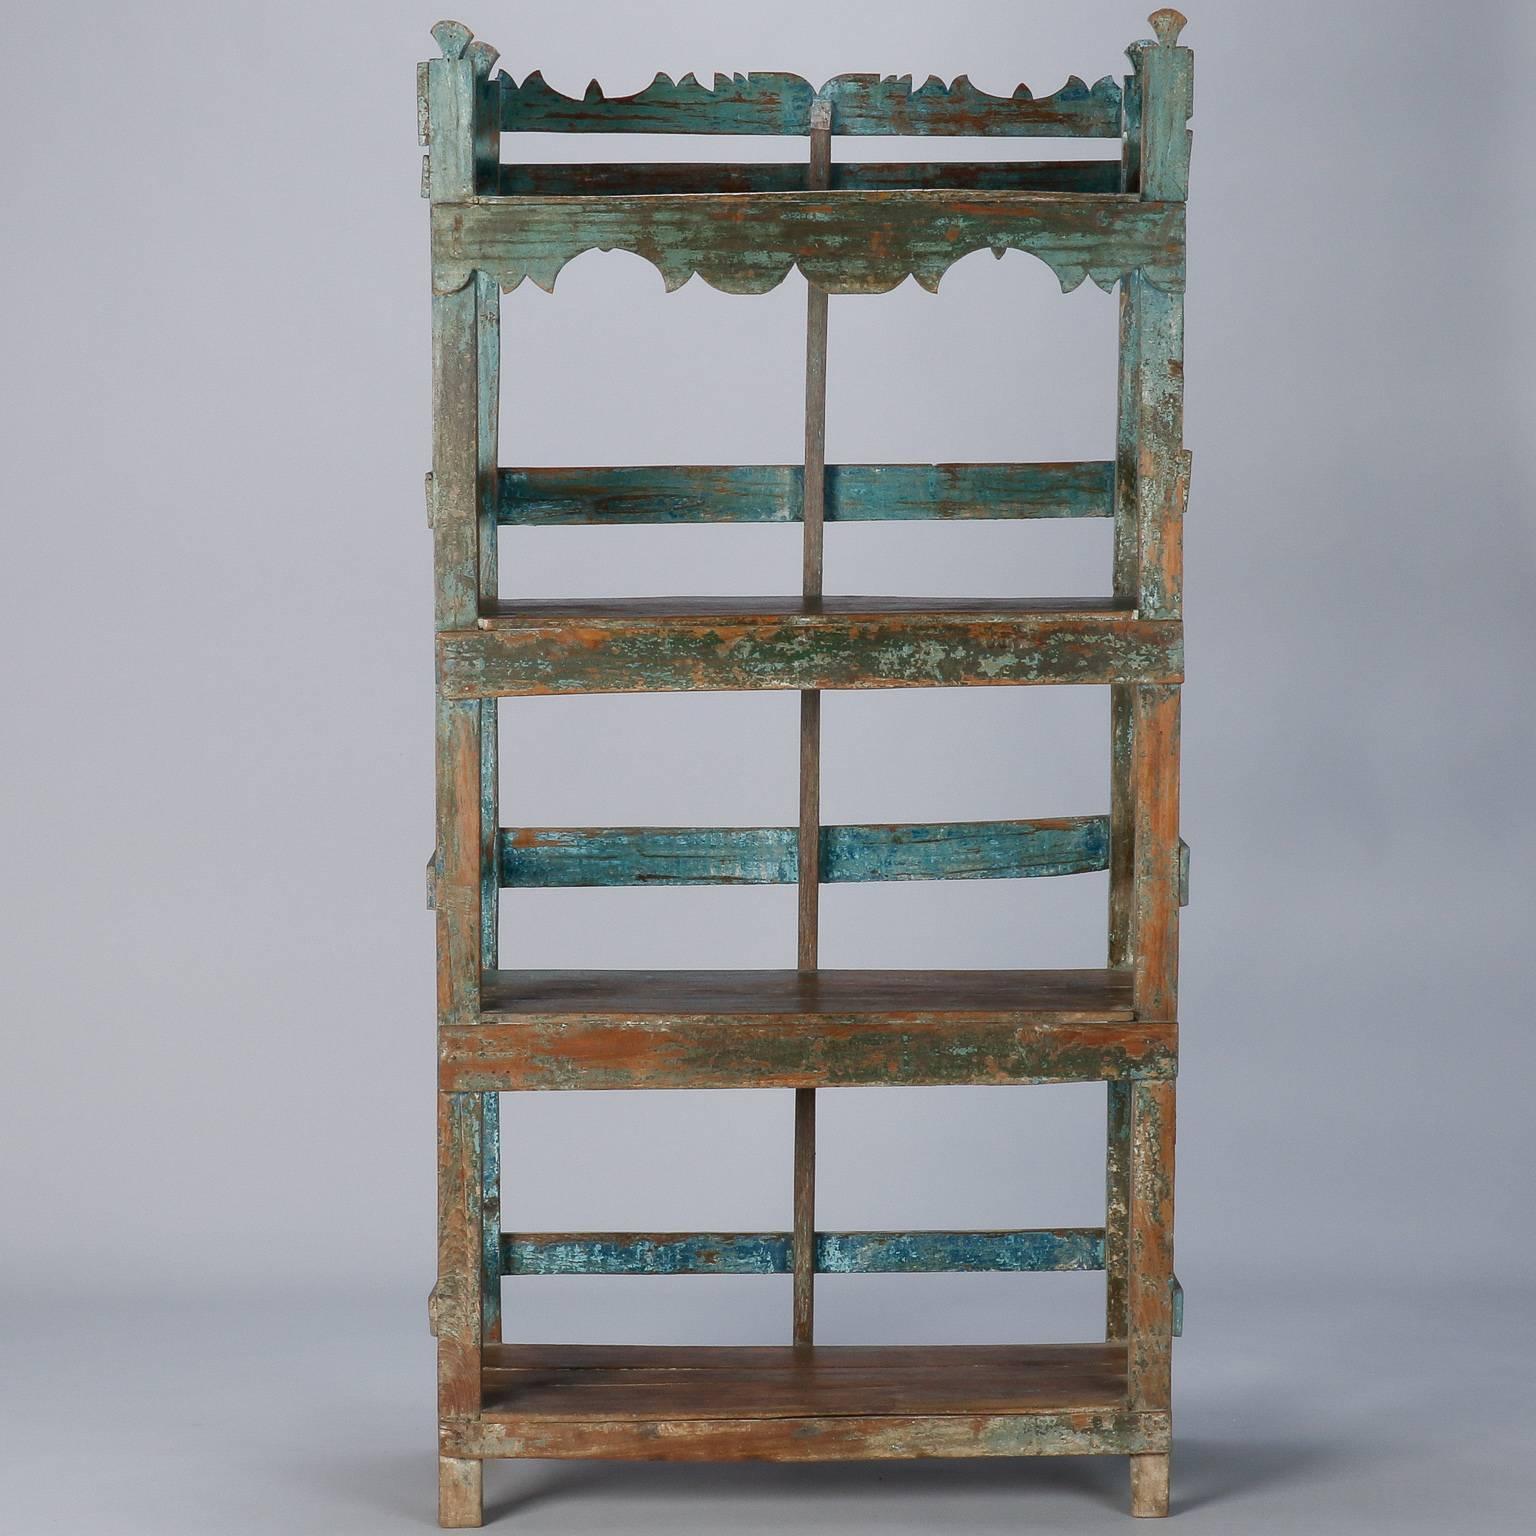 Chinese four shelf étagère with carved details on the top back and apron, circa 1900s. Original blue green paint has areas with considerable wear and loss. The piece has been sanded for a more refined, yet authentic antique painted finish.
  